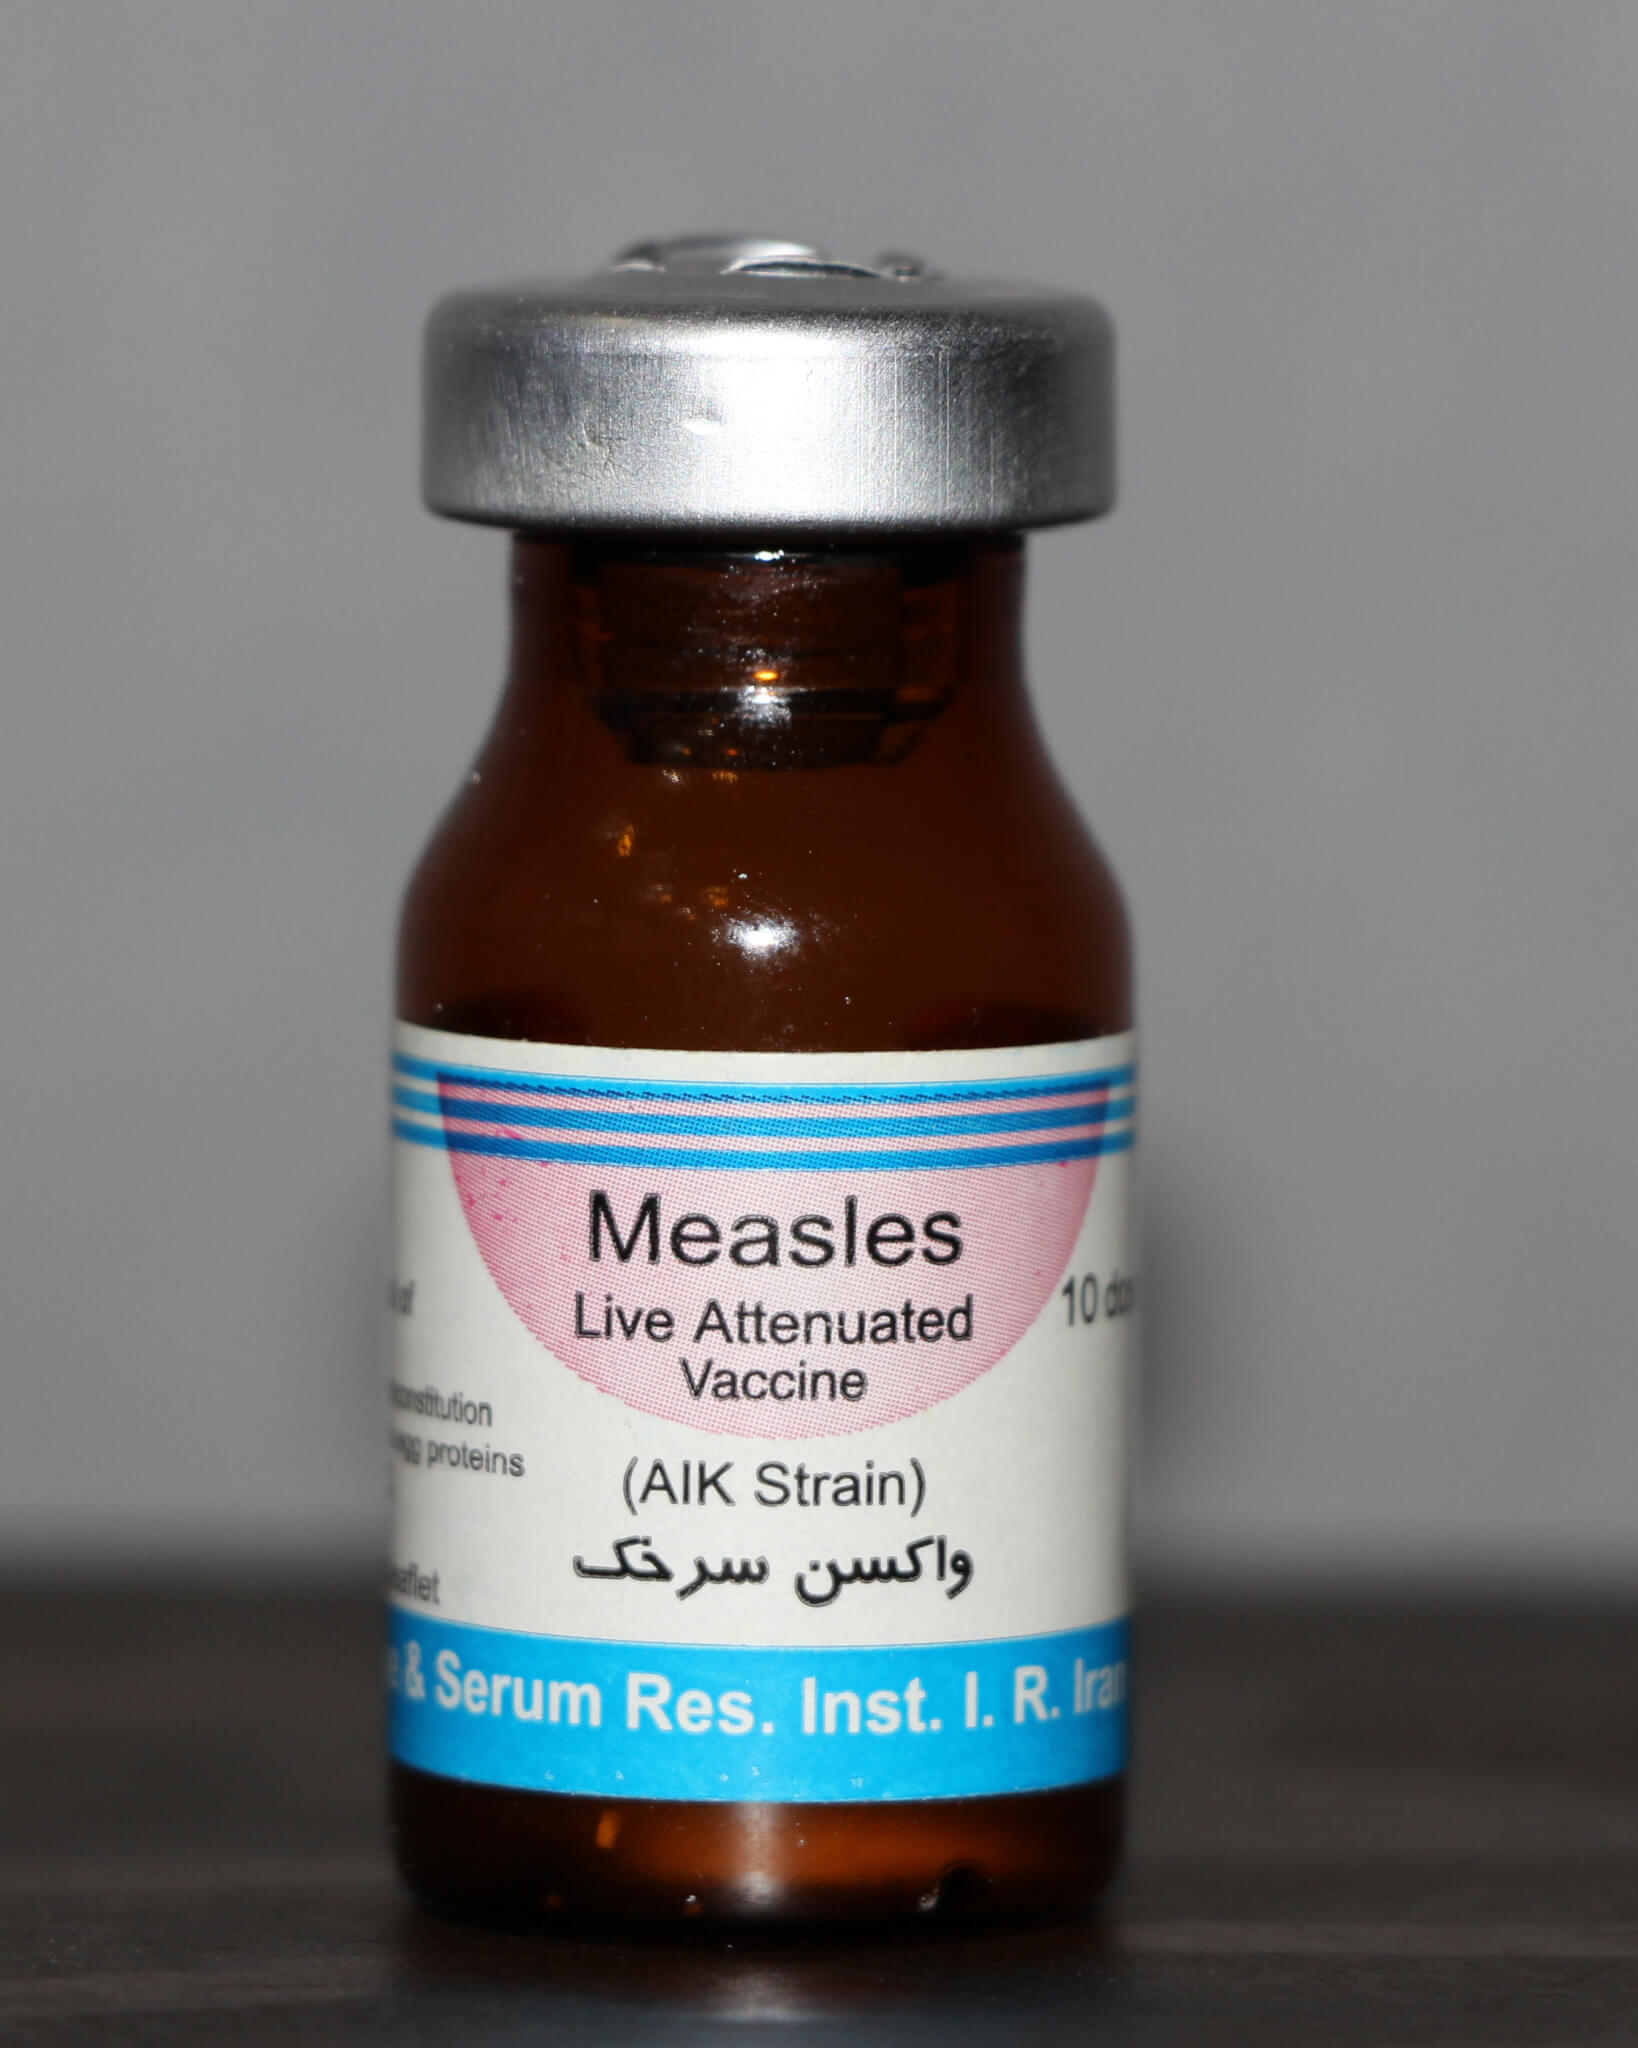 Measles Live Attenuated Vaccine